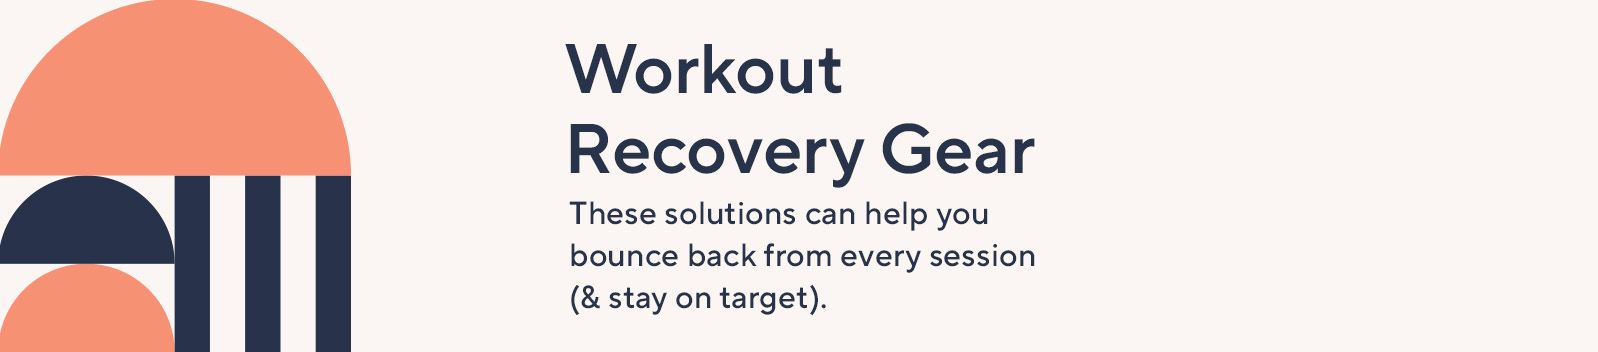 Workout Recovery Gear. These solutions can help you bounce back from every session (& stay on target). 